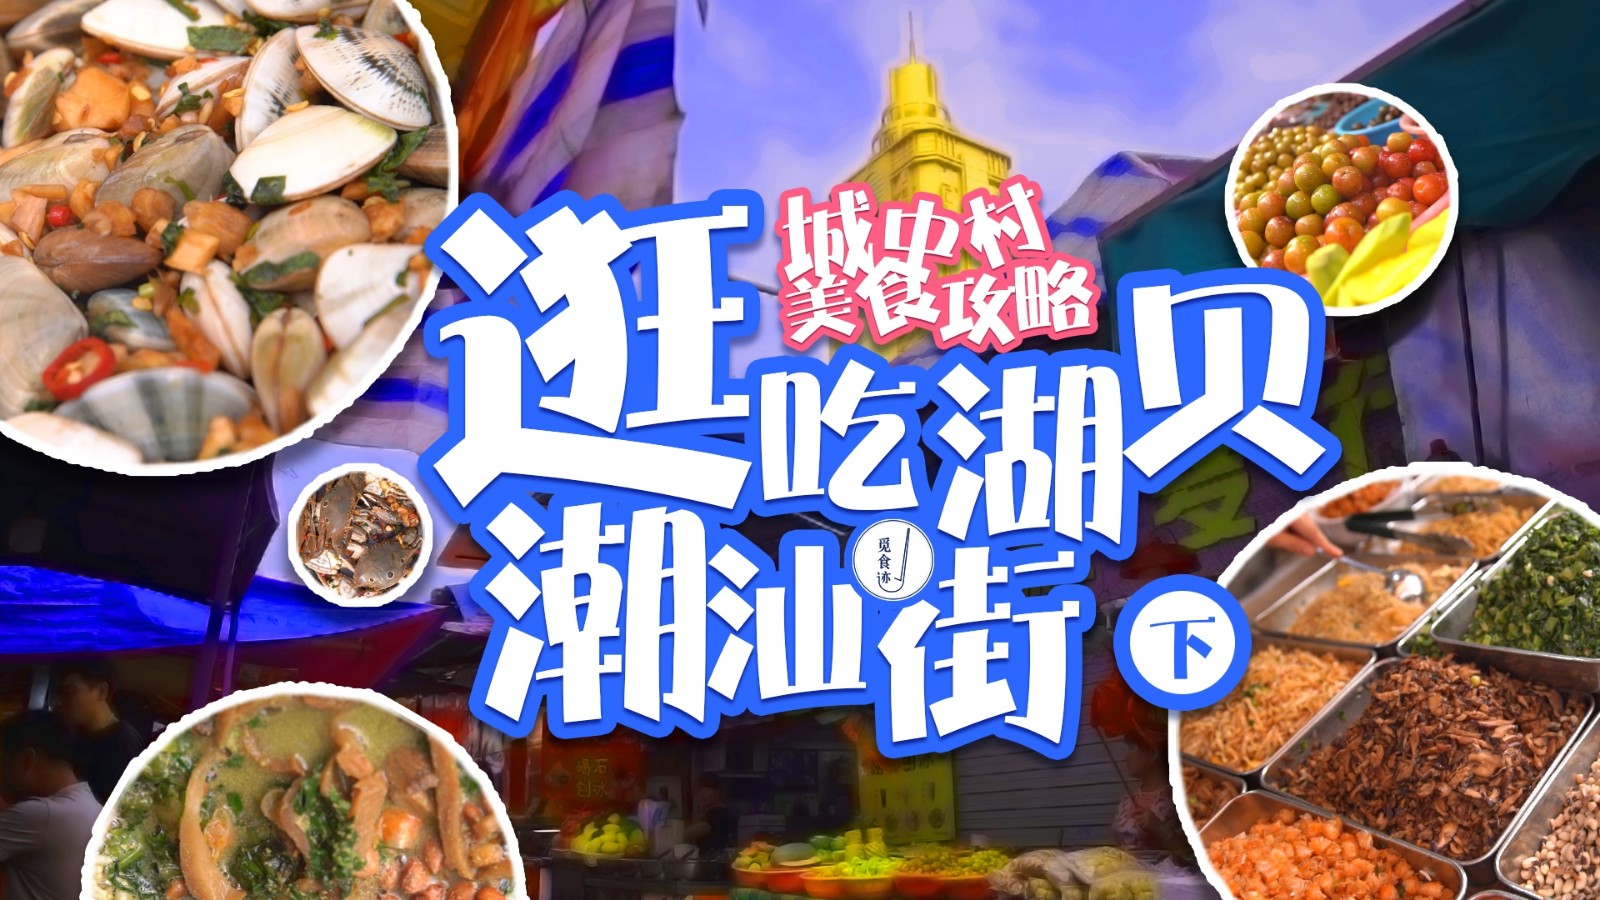 Even with navigation, we will not be able to eat these Chaoshan delicacies anymore.